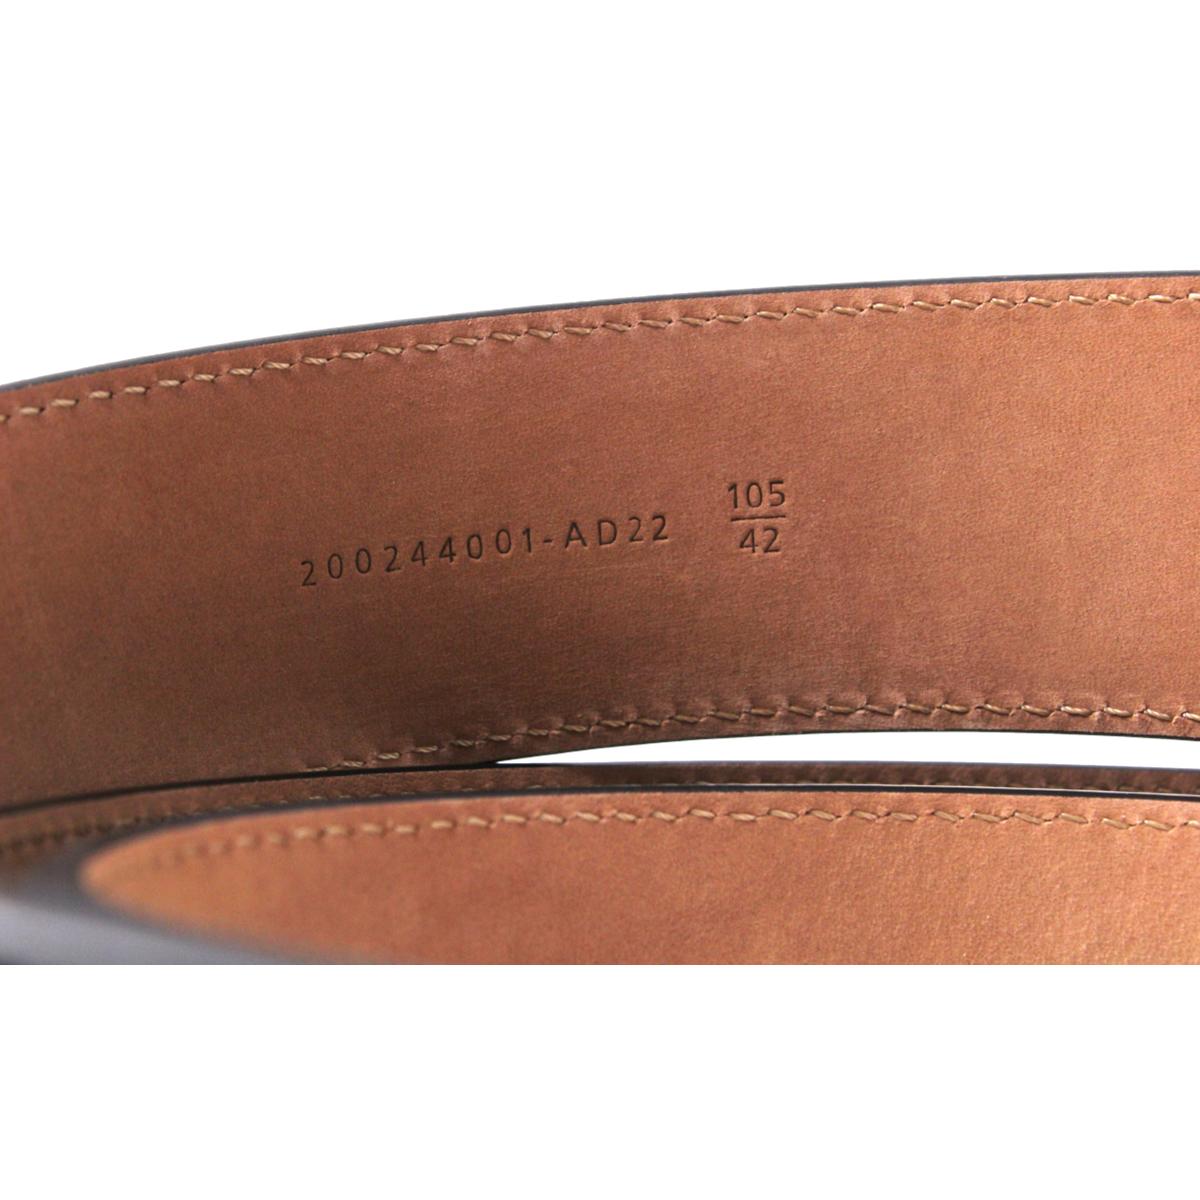 Fendi Reversible Black Brown Leather Perforated FF Logo Belt Size 105 7C0437 at_Queen_Bee_of_Beverly_Hills